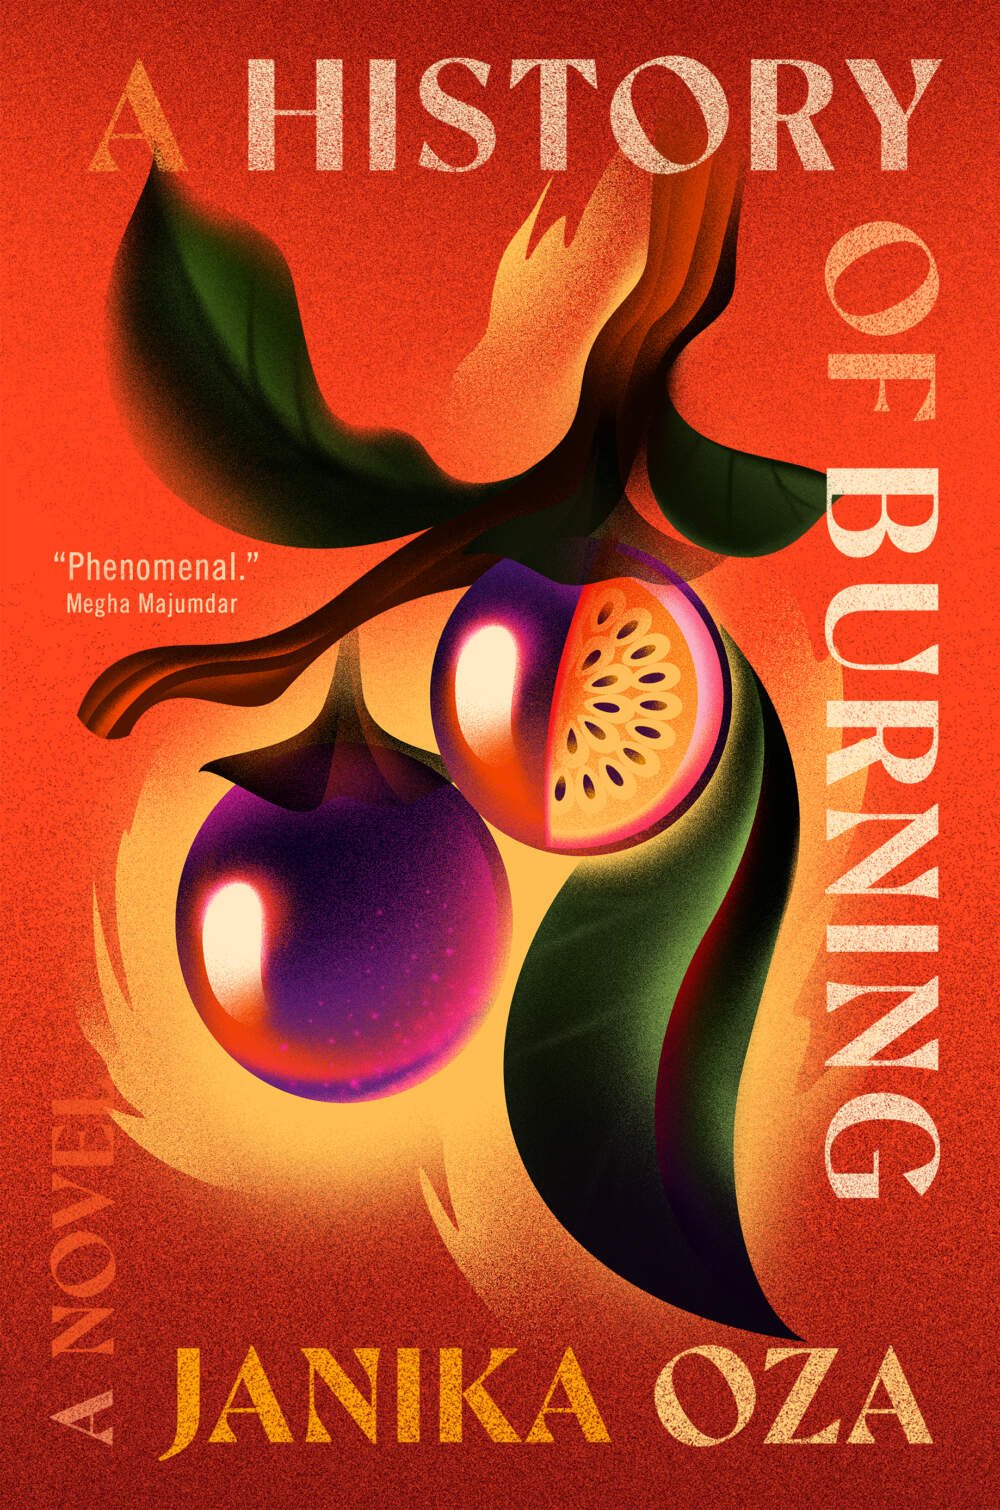 The cover of "A History of Burning" by Janika Oza. (Courtesy)